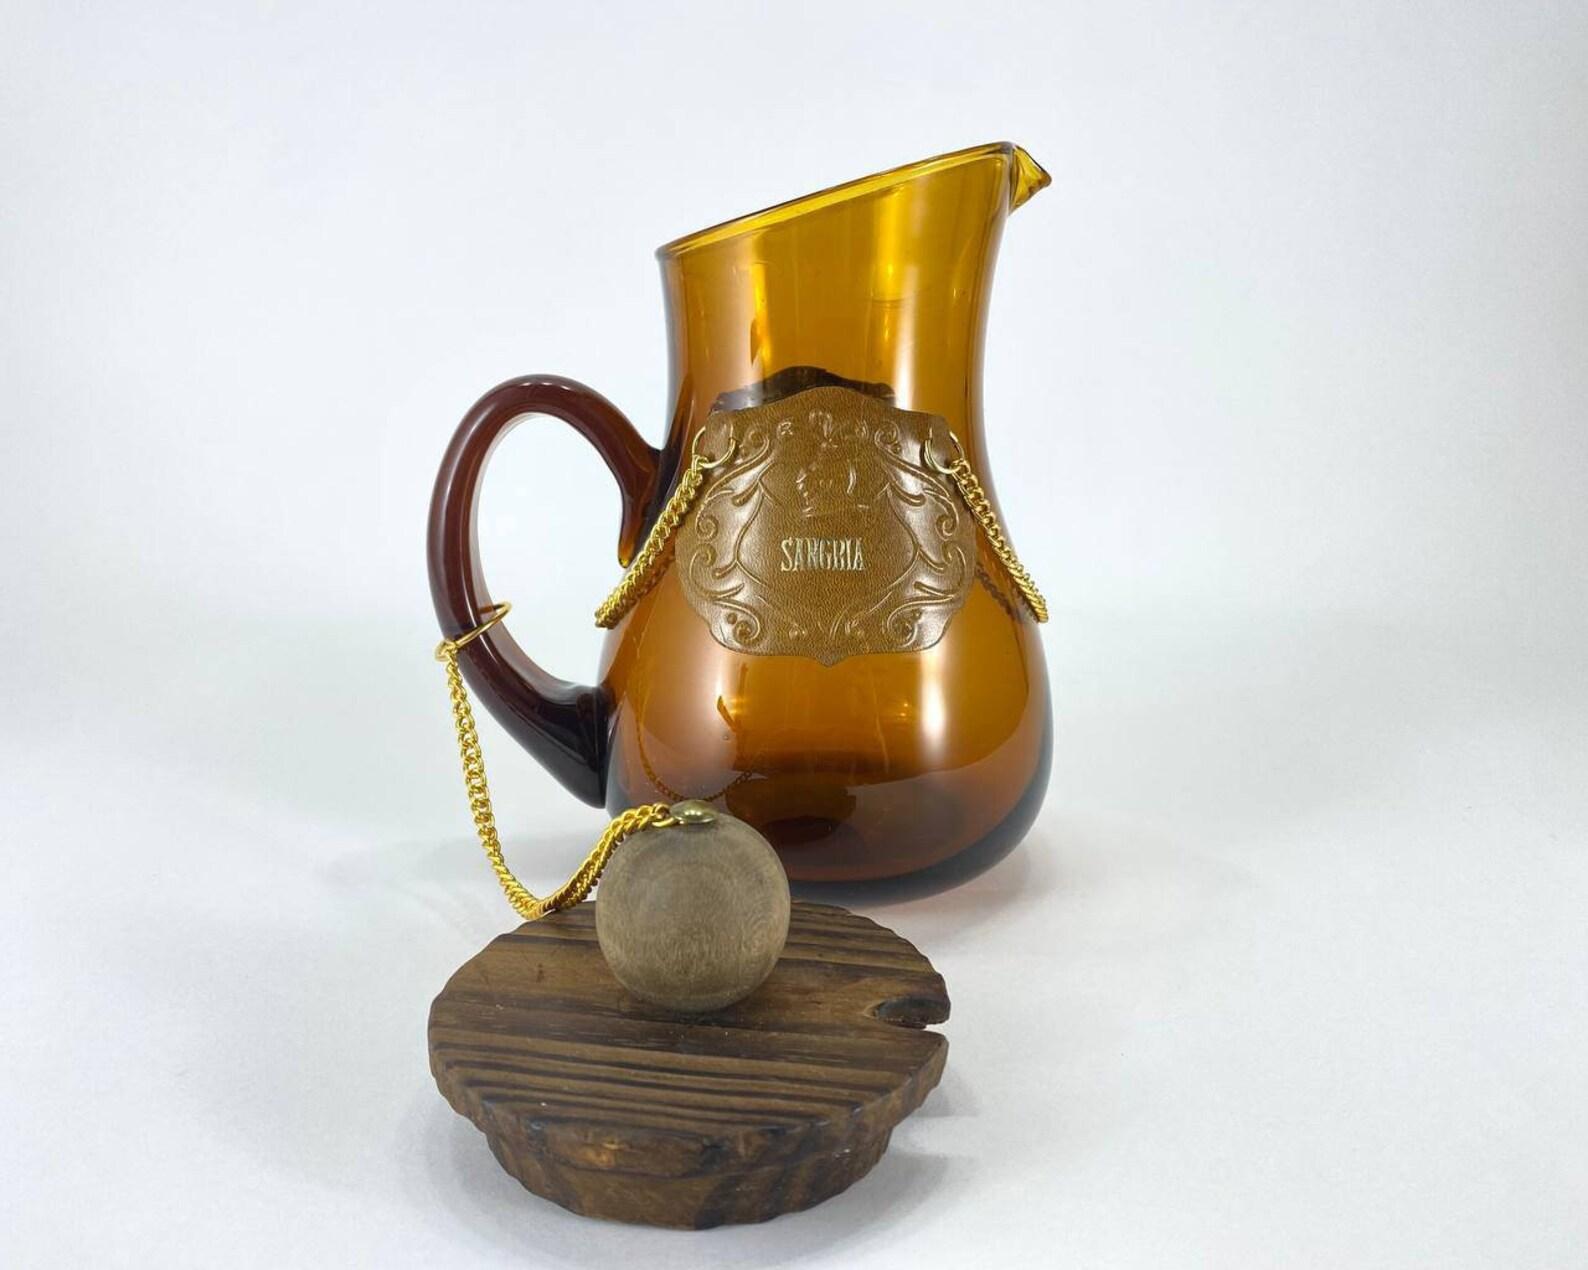 Italian Vintage Carafe or Pitcher with Lid in Amber Glass with Wooden Stopper, 1970 For Sale